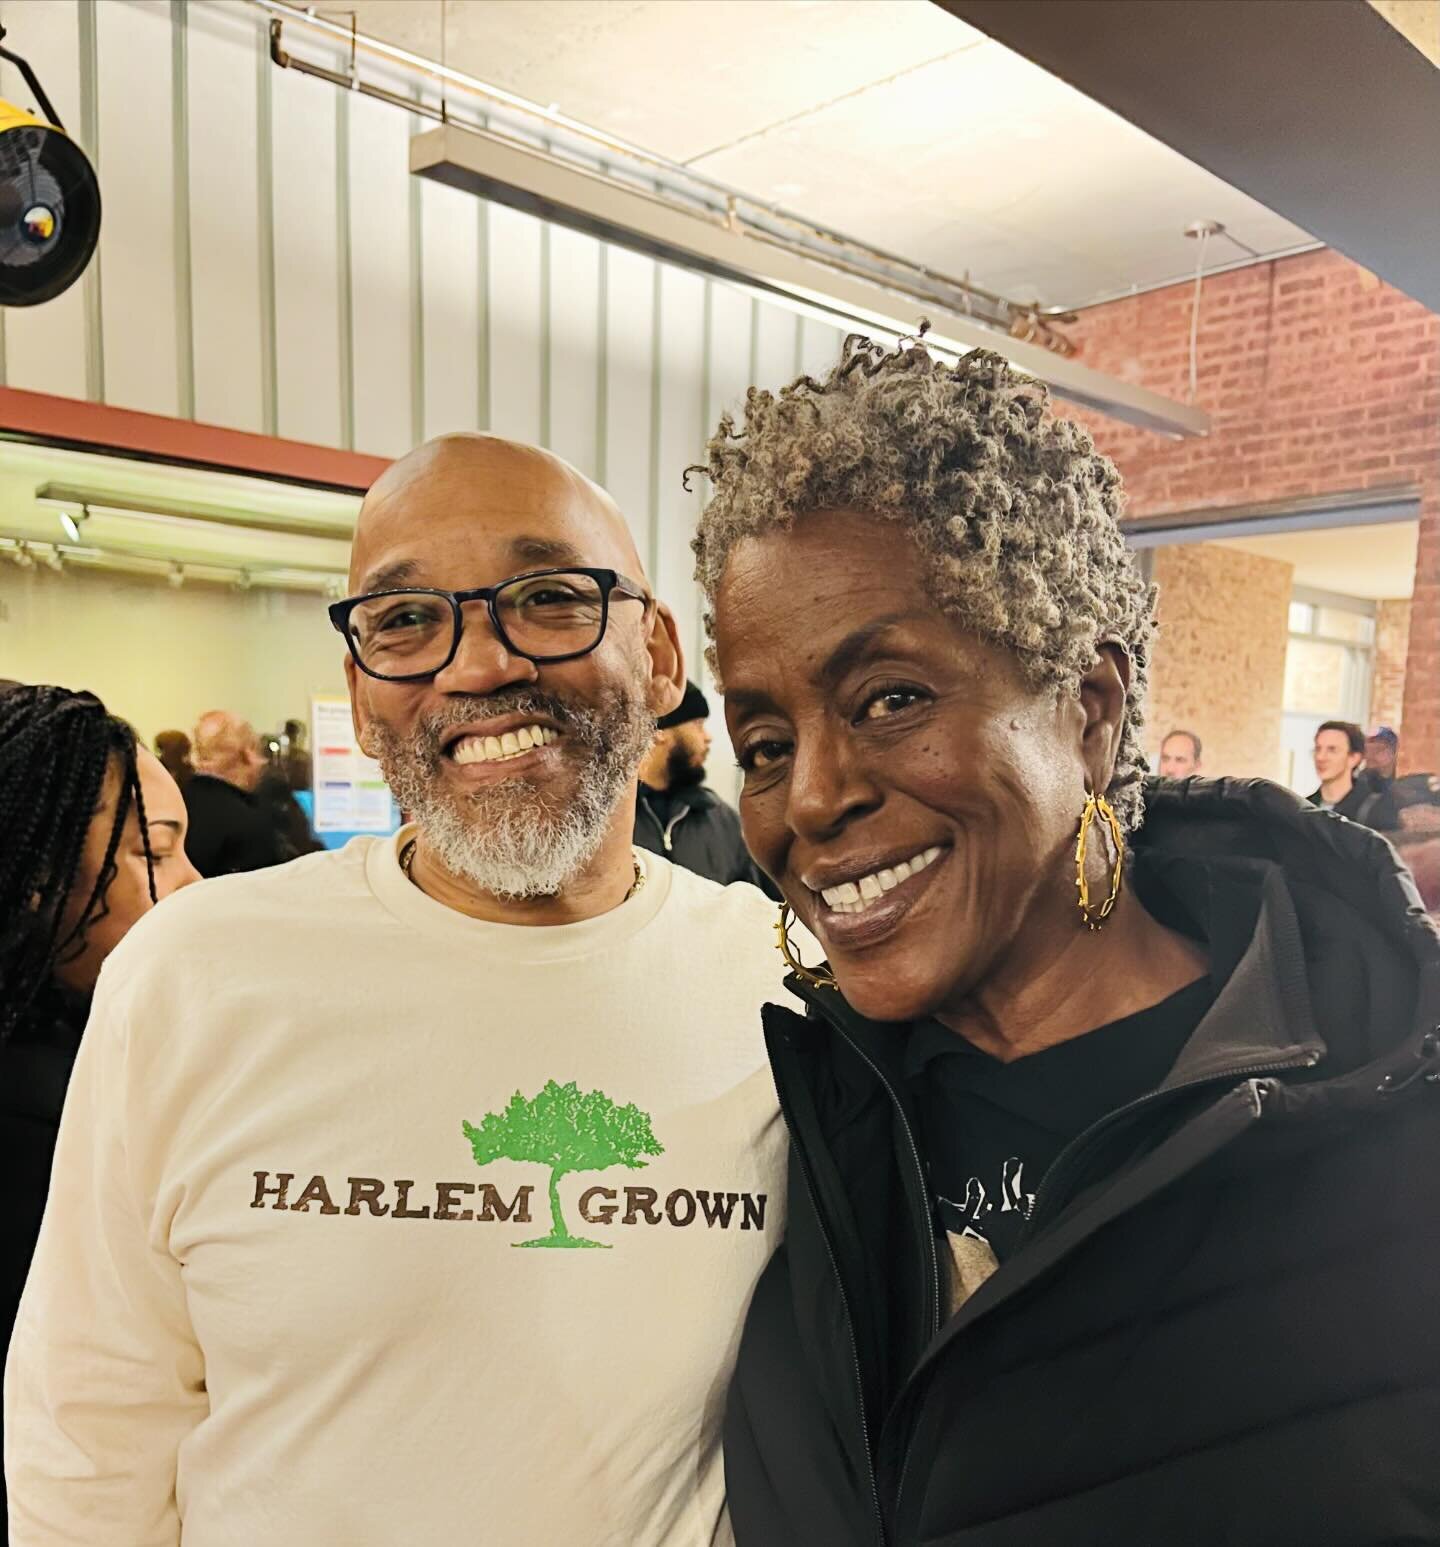 Last night I listened to the wisdom of 2 men doing the work in Harlem.  Thank you @TonyHillery of @harlemgrown and @marcuscooks of @roosterharlem for sharing your knowledge on food, food equity and food justice.

#FoodEquity
#FoodJustice
#EatWell
#Ci